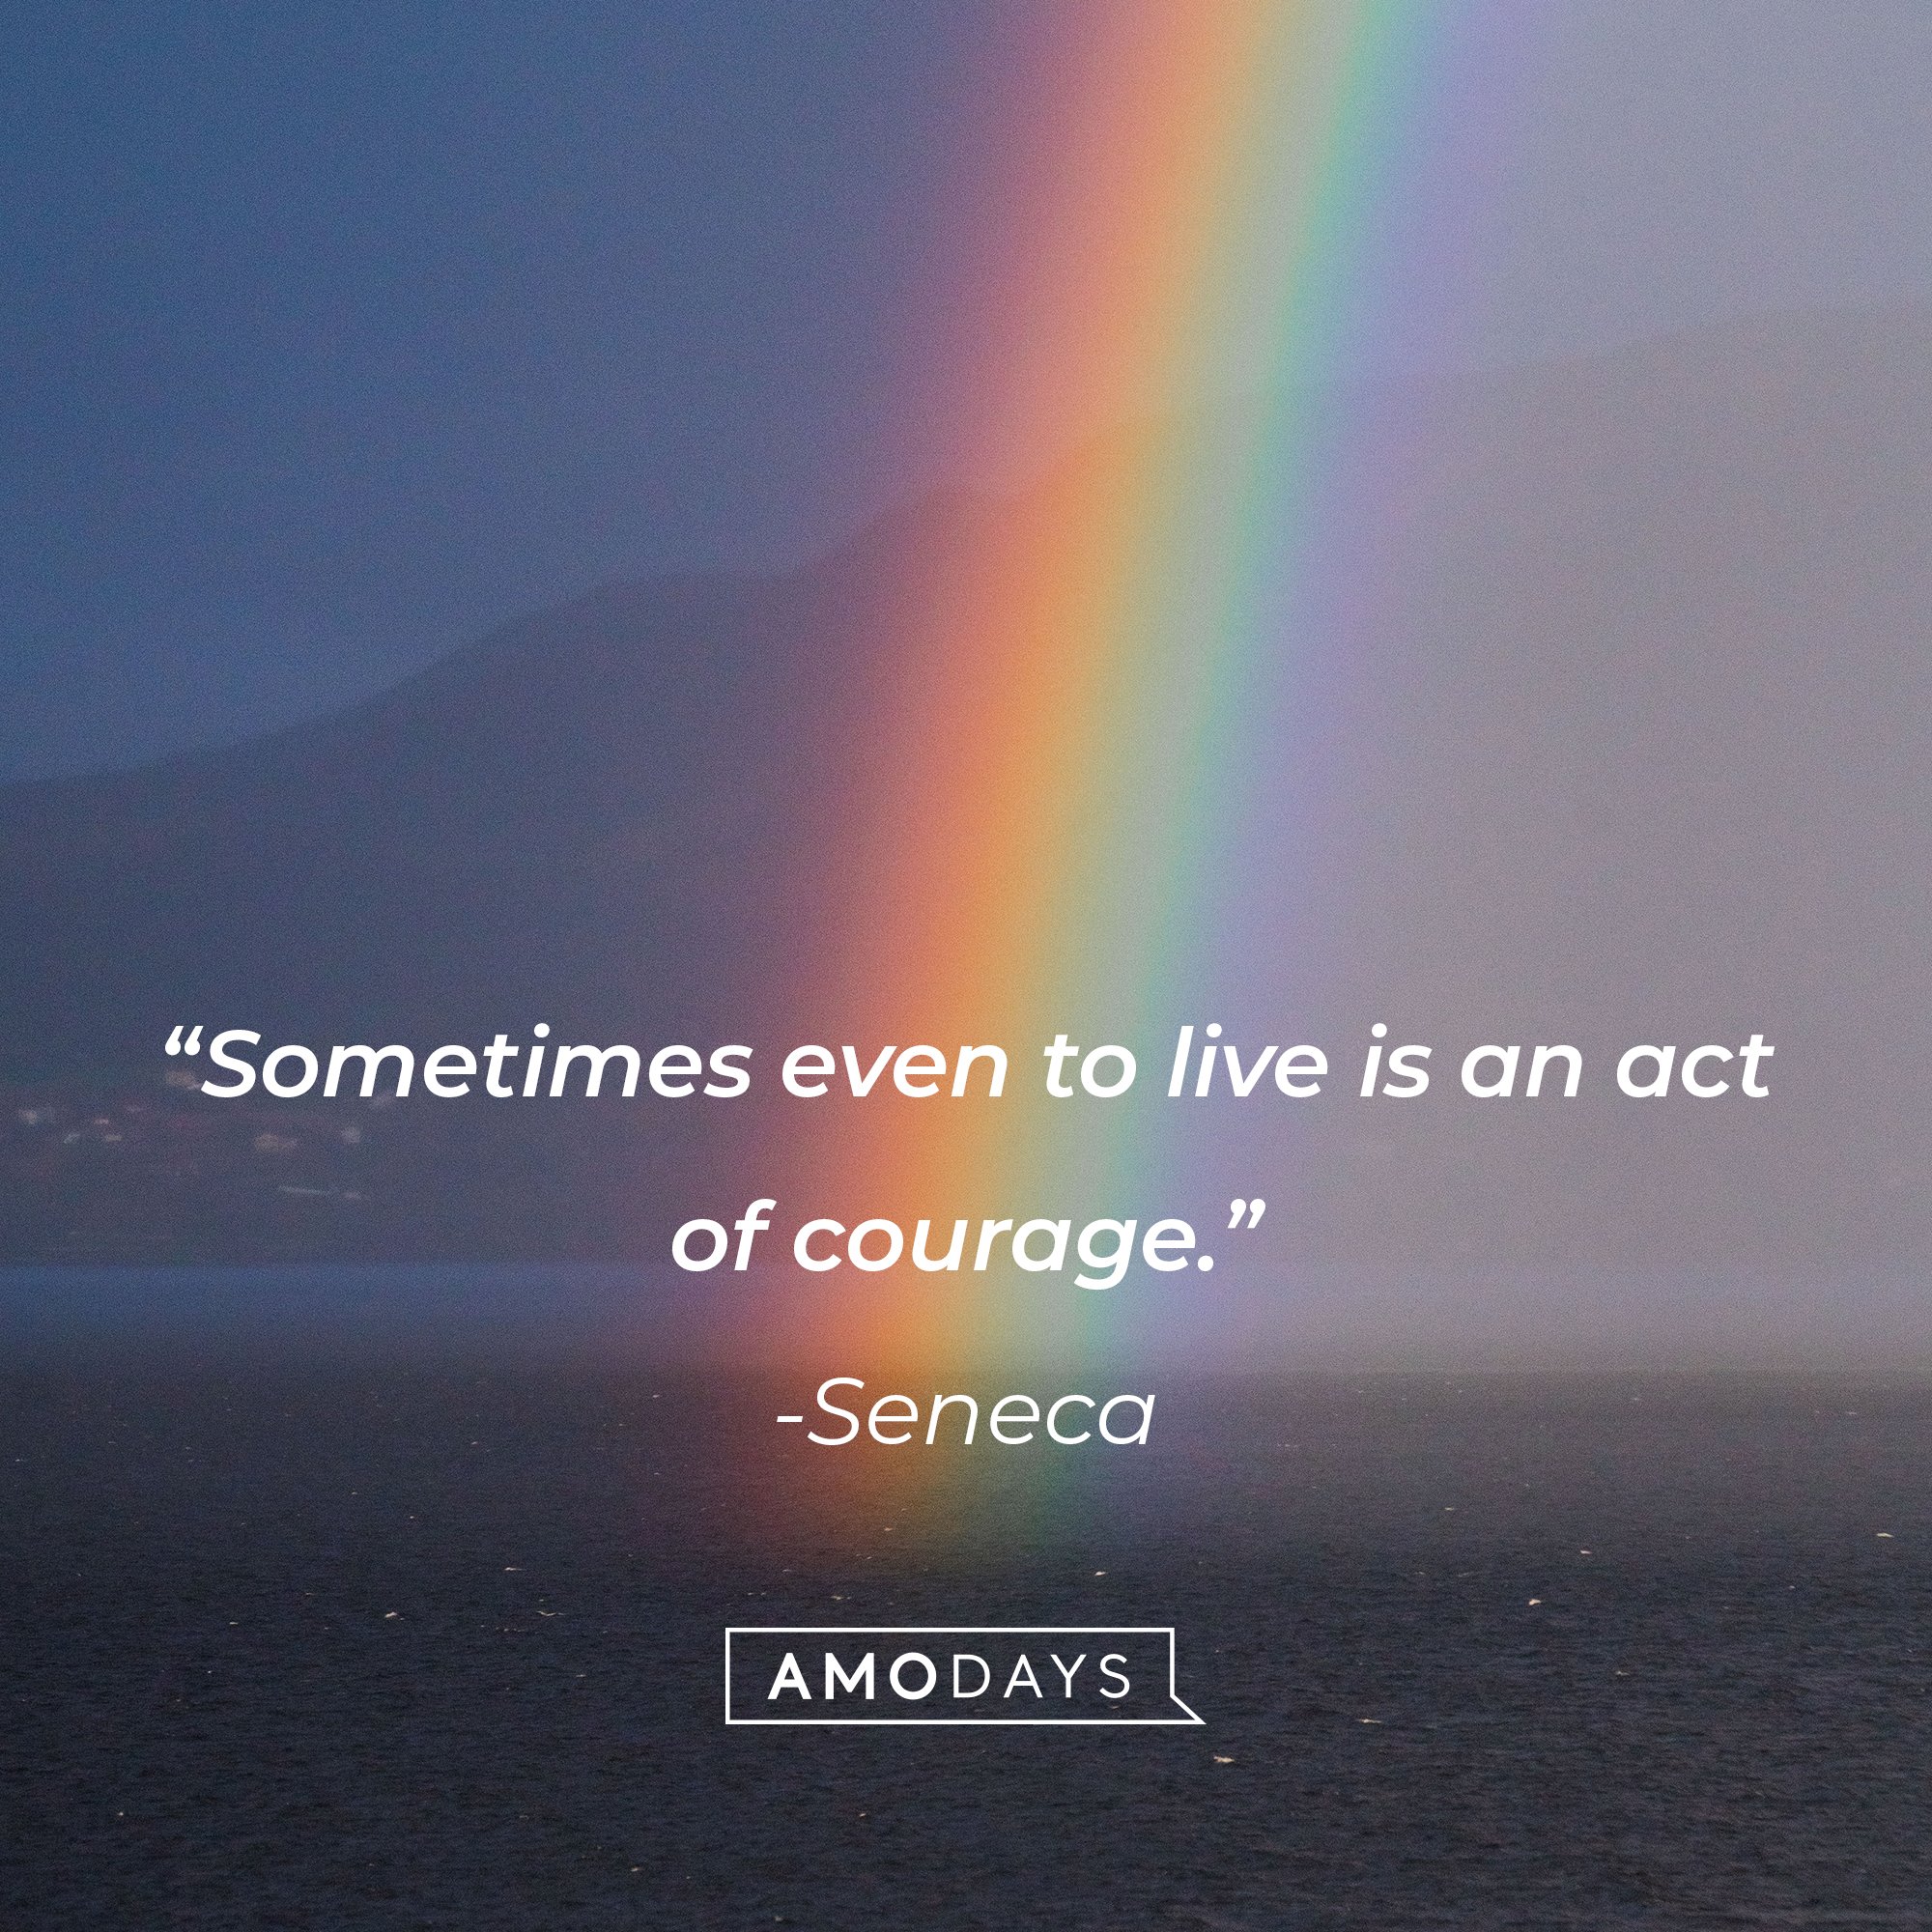 Seneca's quote: “Sometimes even to live is an act of courage.” | Image: AmoDays